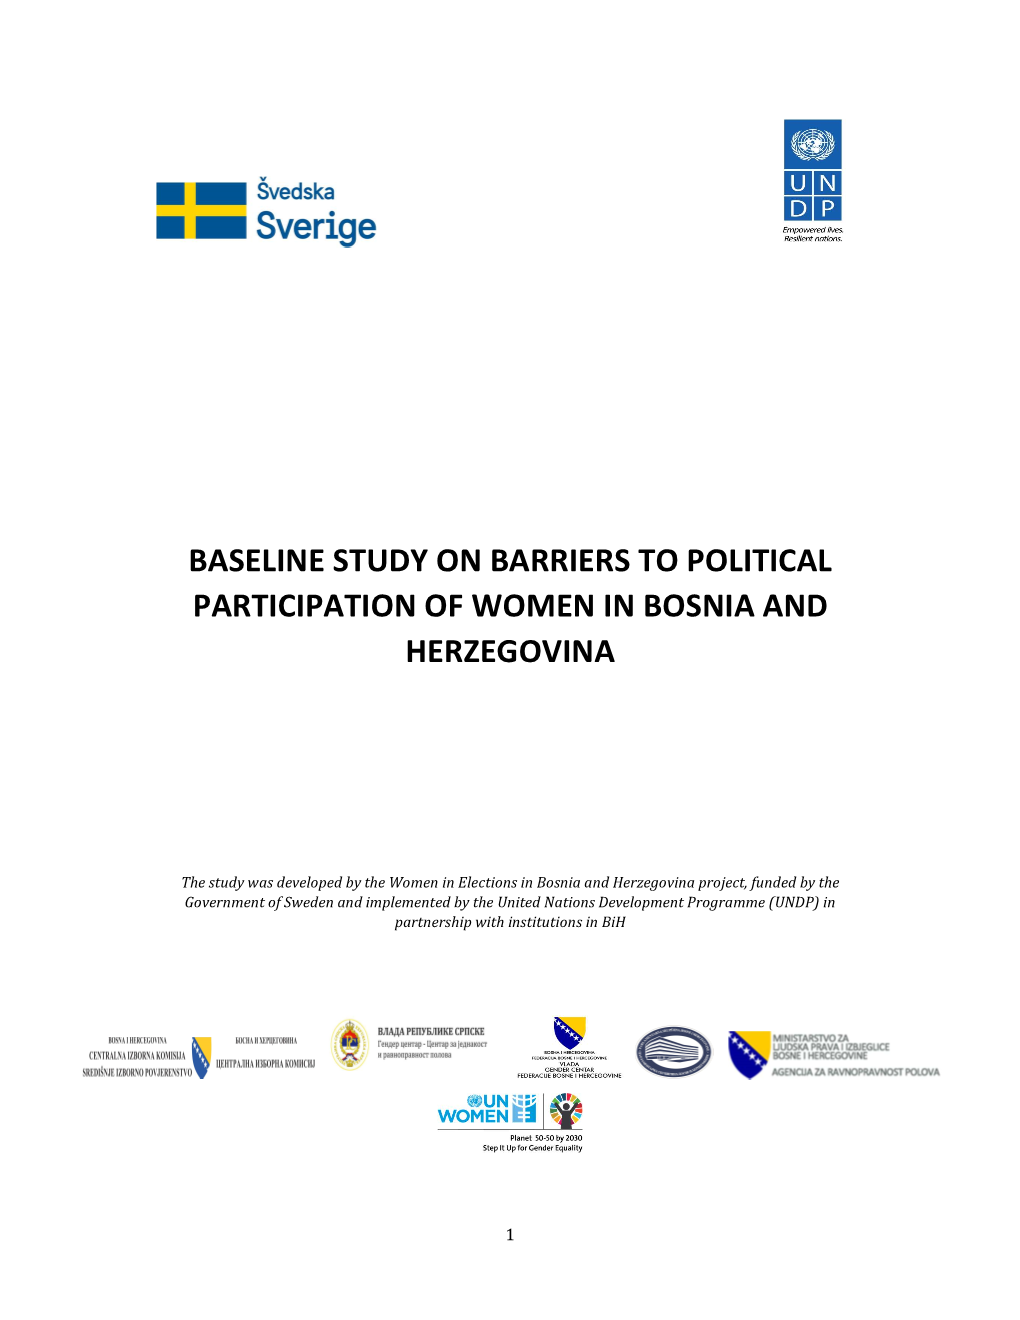 Baseline Study on Barriers to Political Participation of Women in Bosnia and Herzegovina